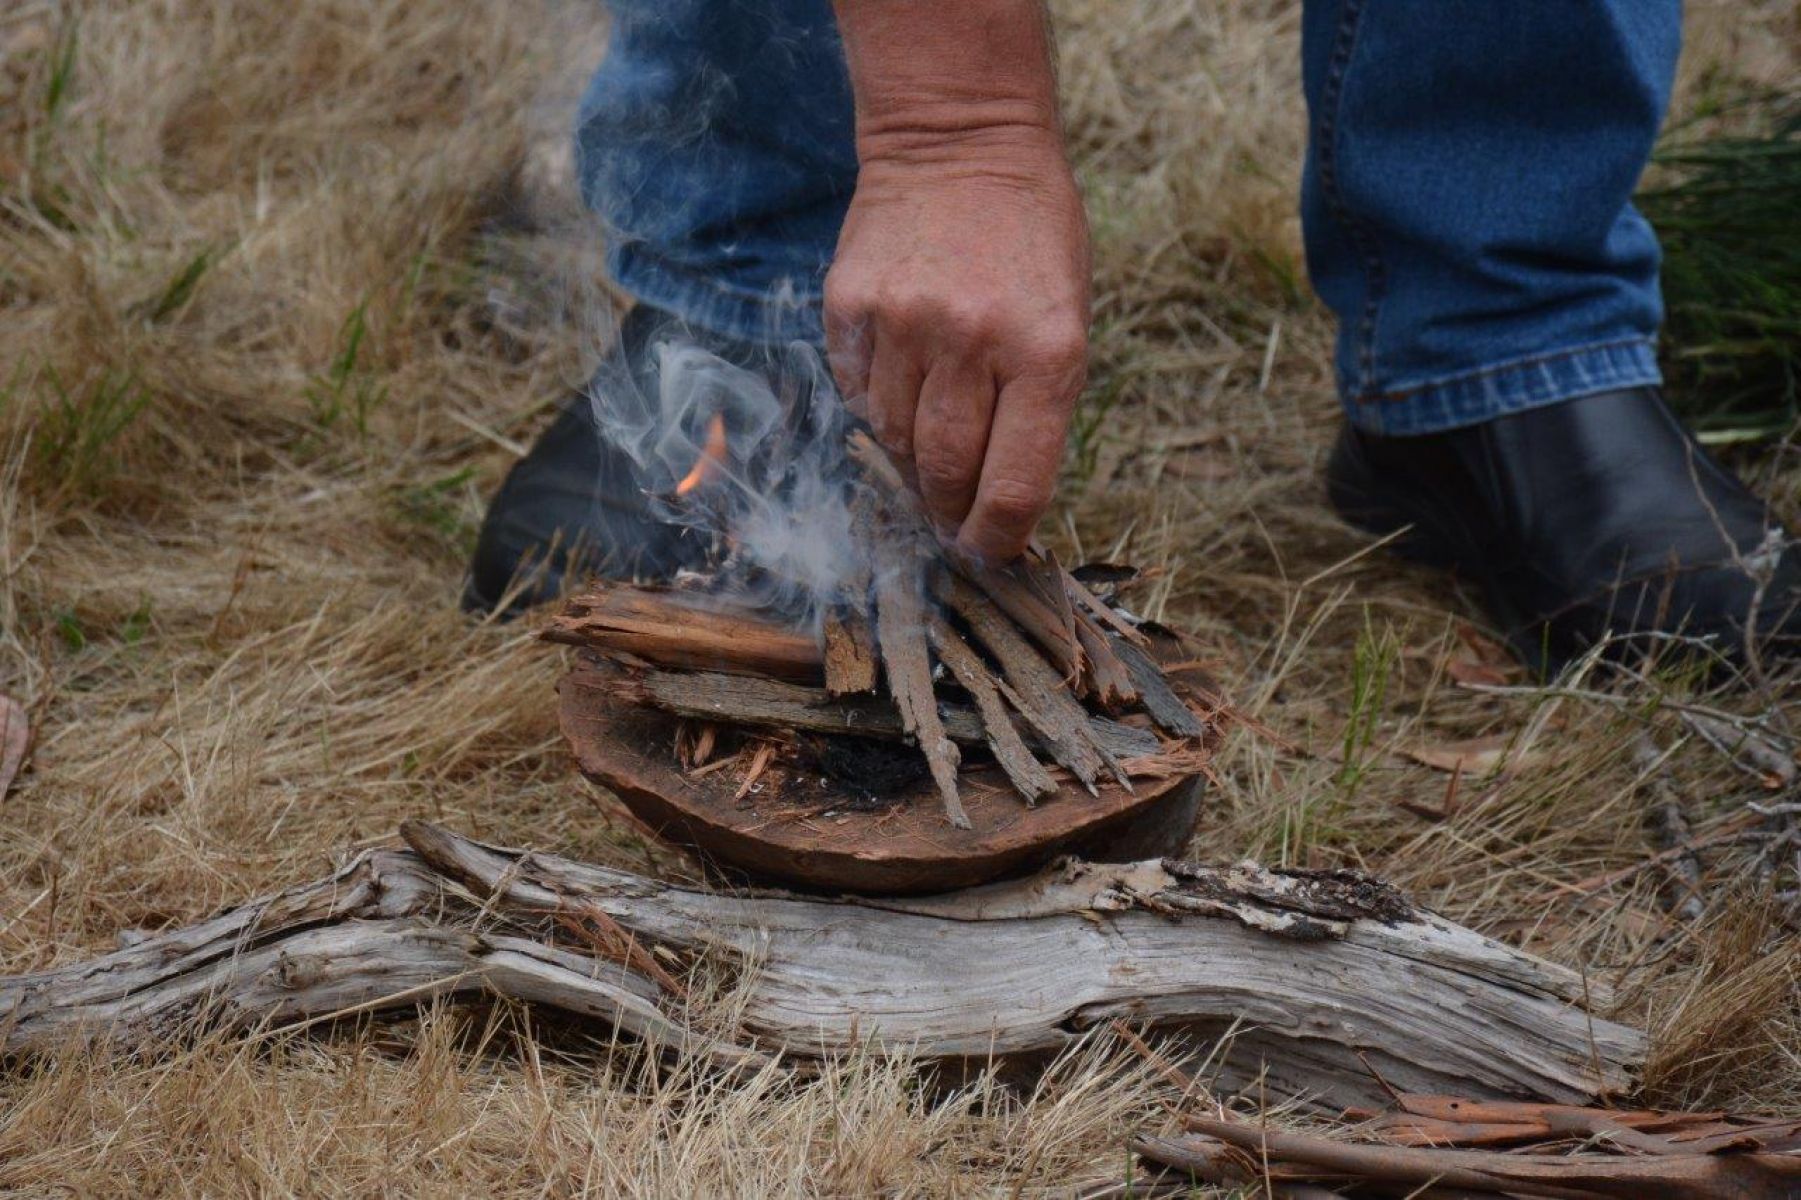 Image of a person hands and feet. They are bent down towards a small smoking ceremony fire, bark in a dish leaning on a large piece of wood. 